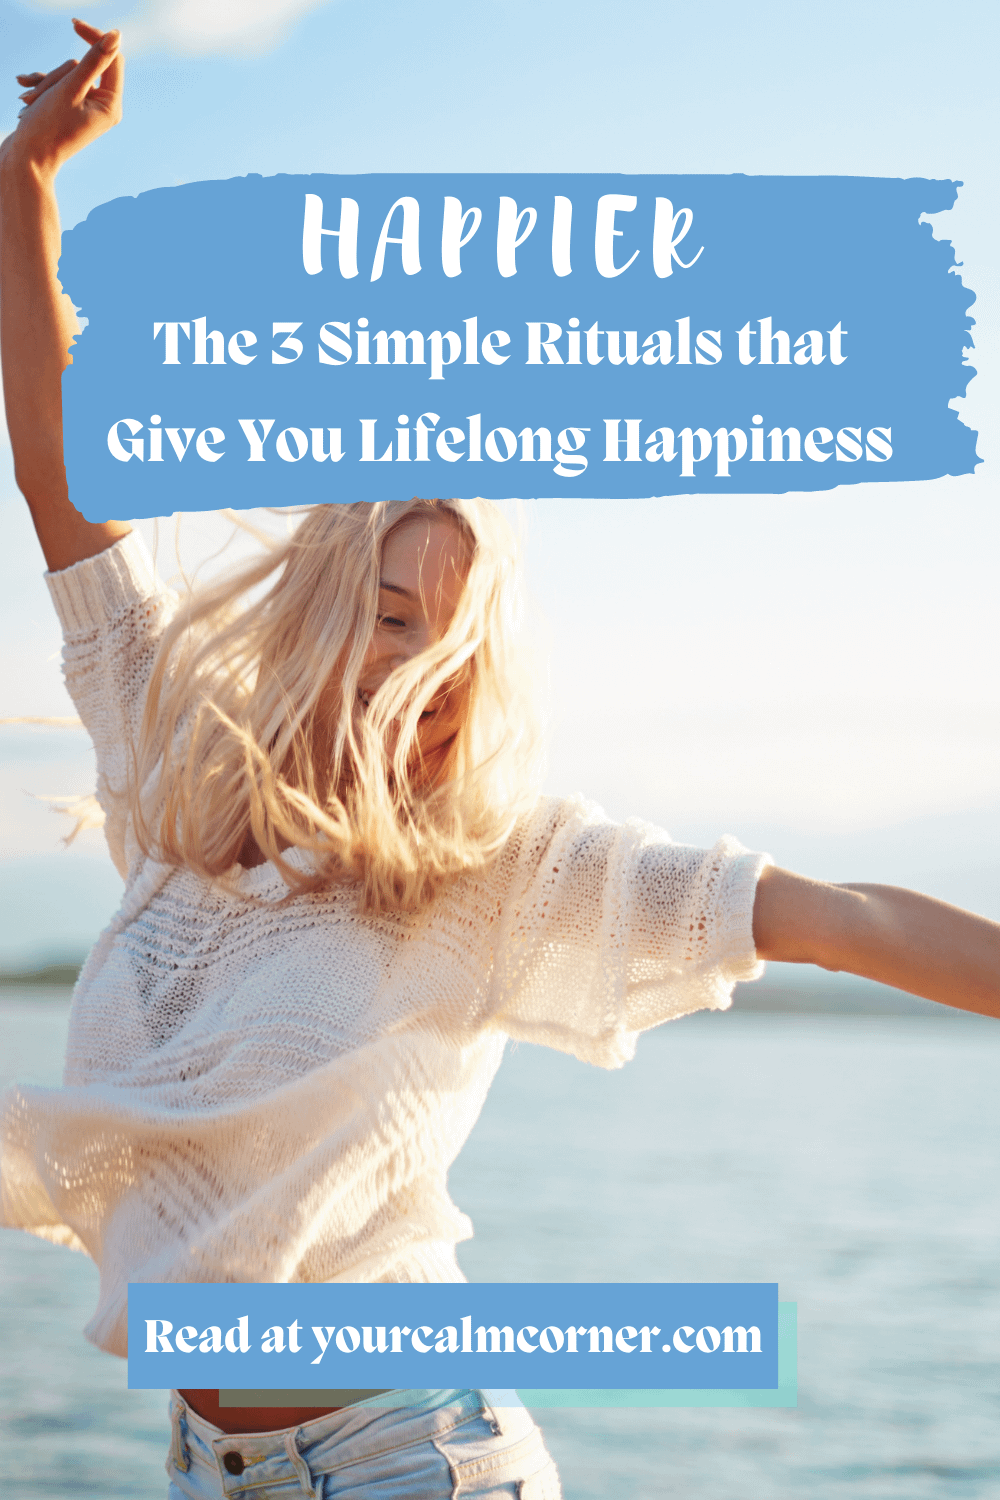 Happier - the 3 simple rituals that give you lifelong happiness